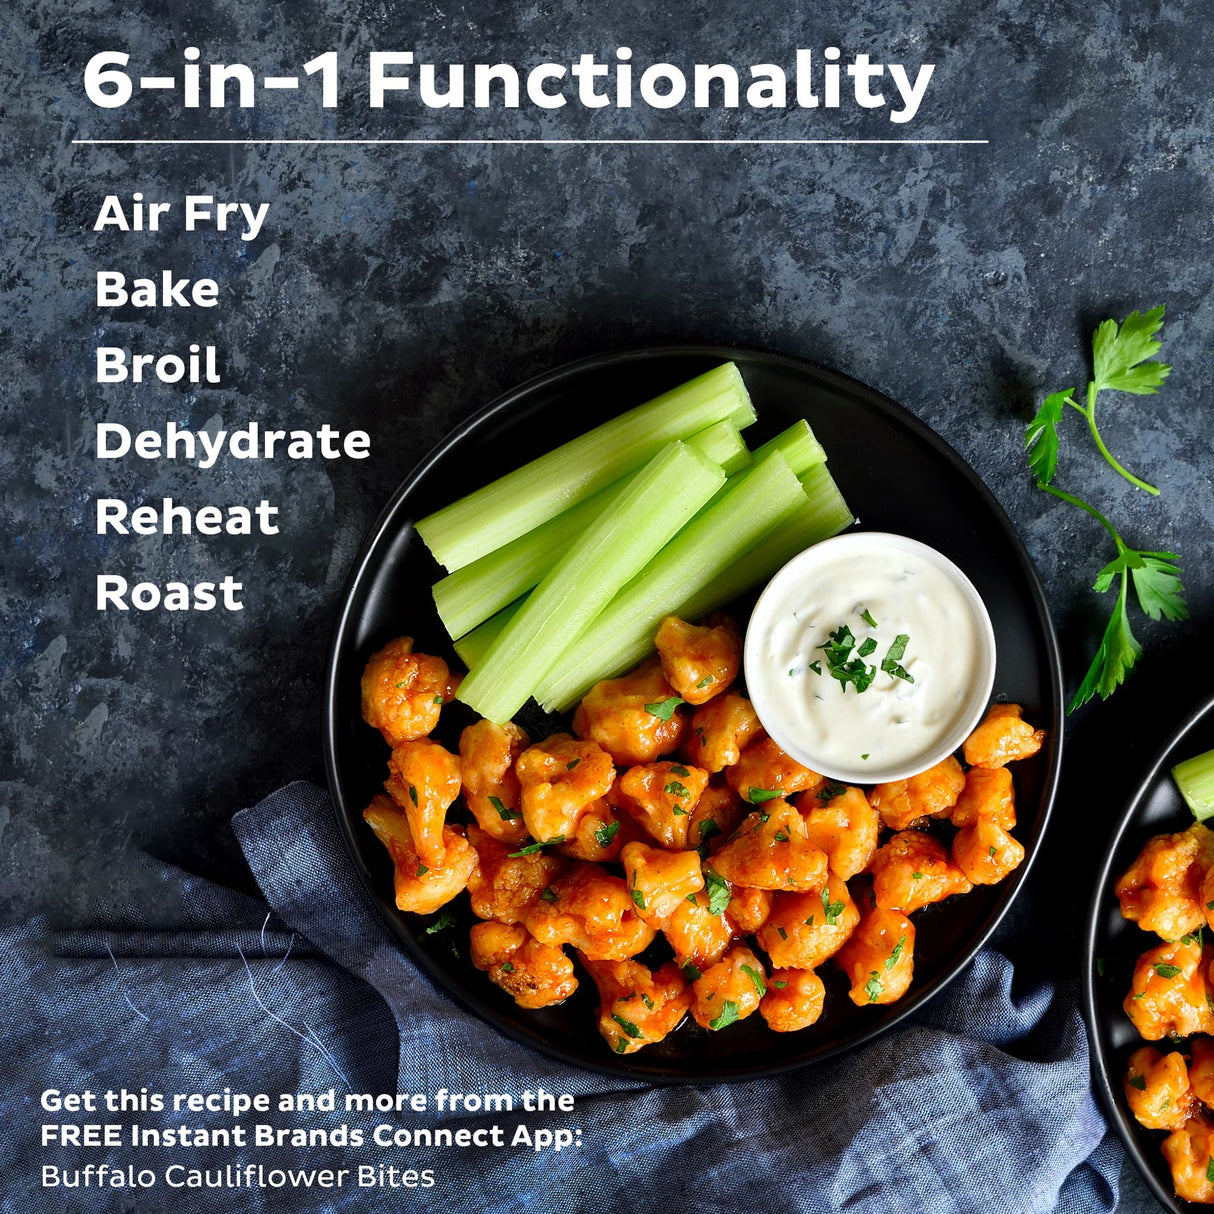  Instant™ Vortex™ Plus 6-quart Air Fryer with text 6 in 1 Functionality